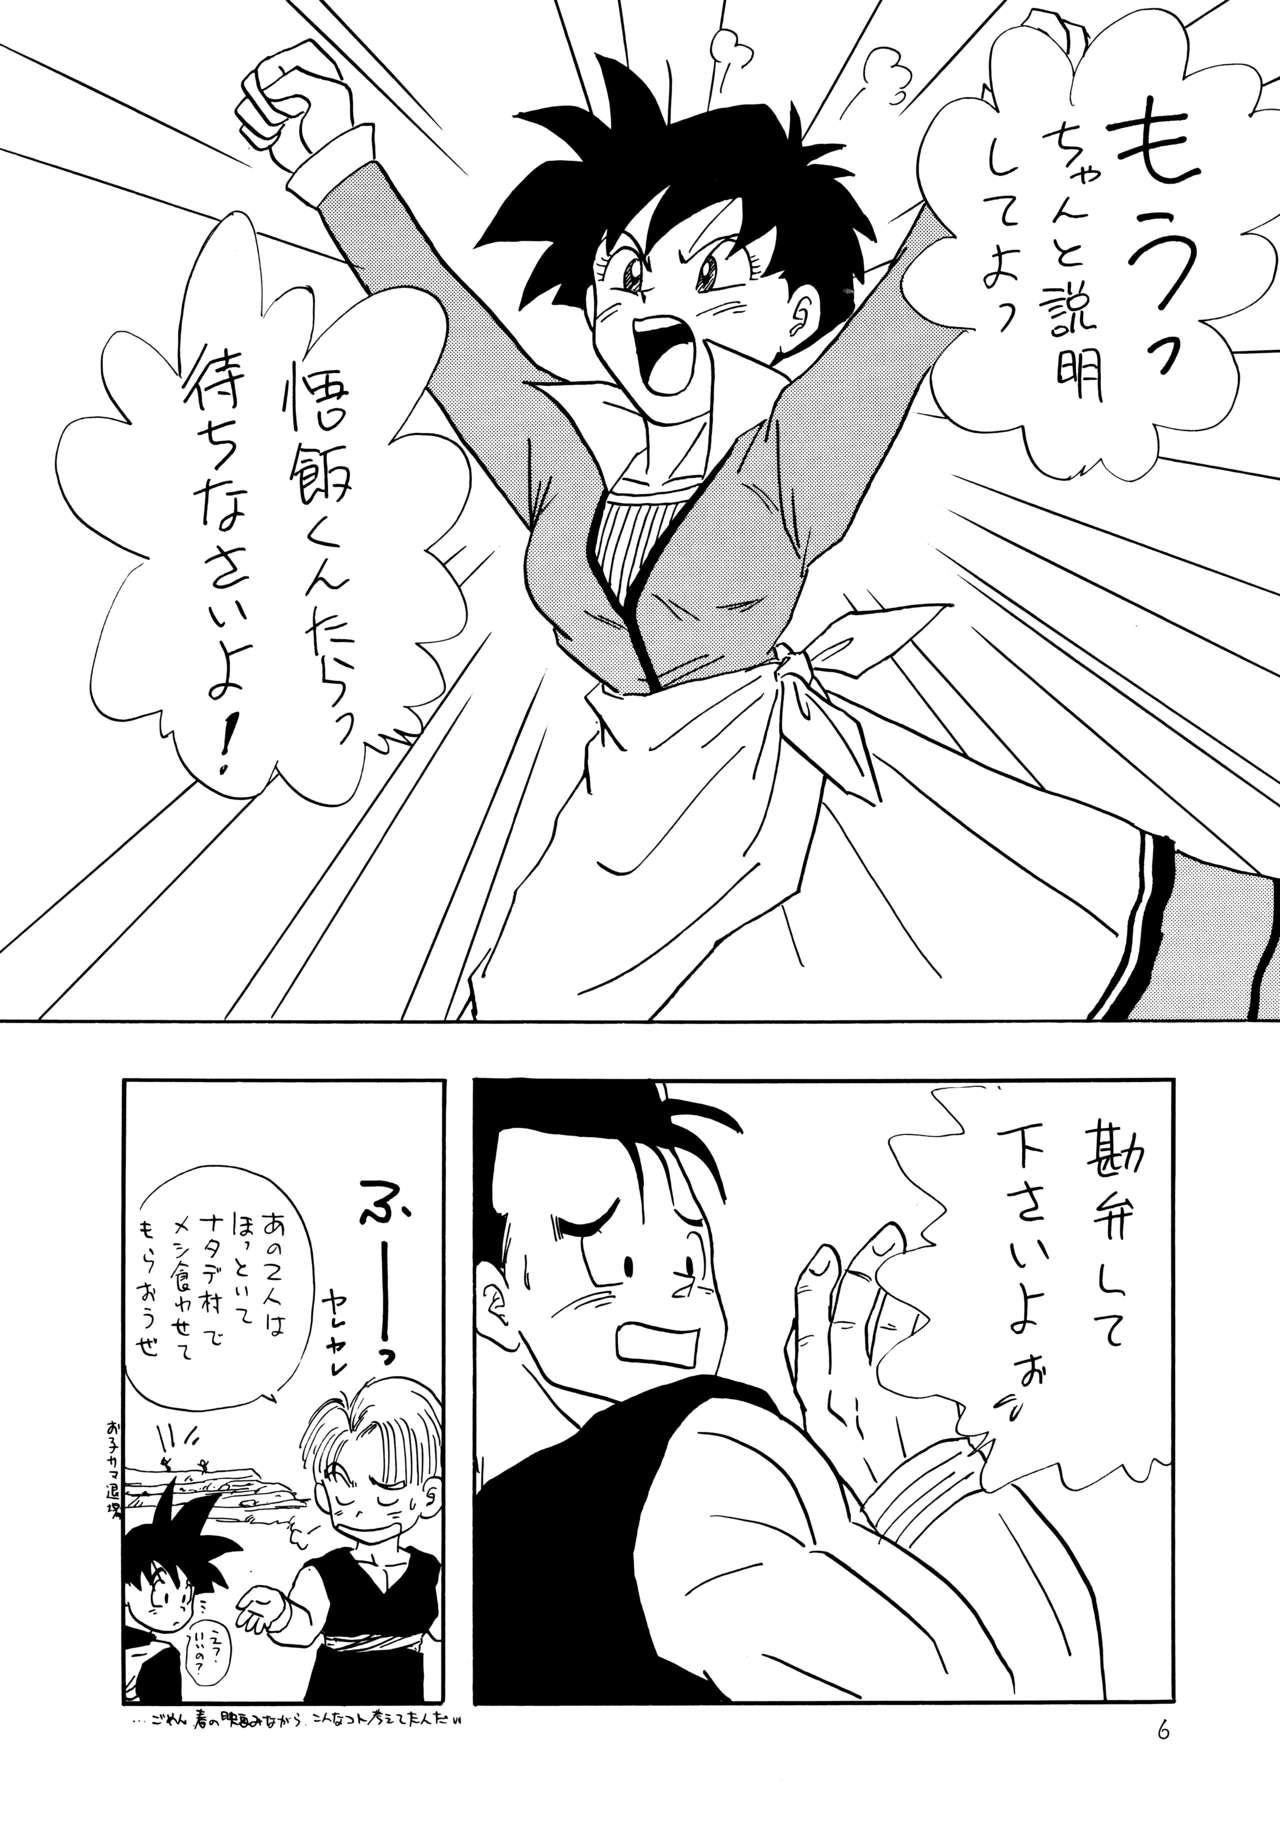 Ginger Y - Dragon ball z Blowing - Page 6